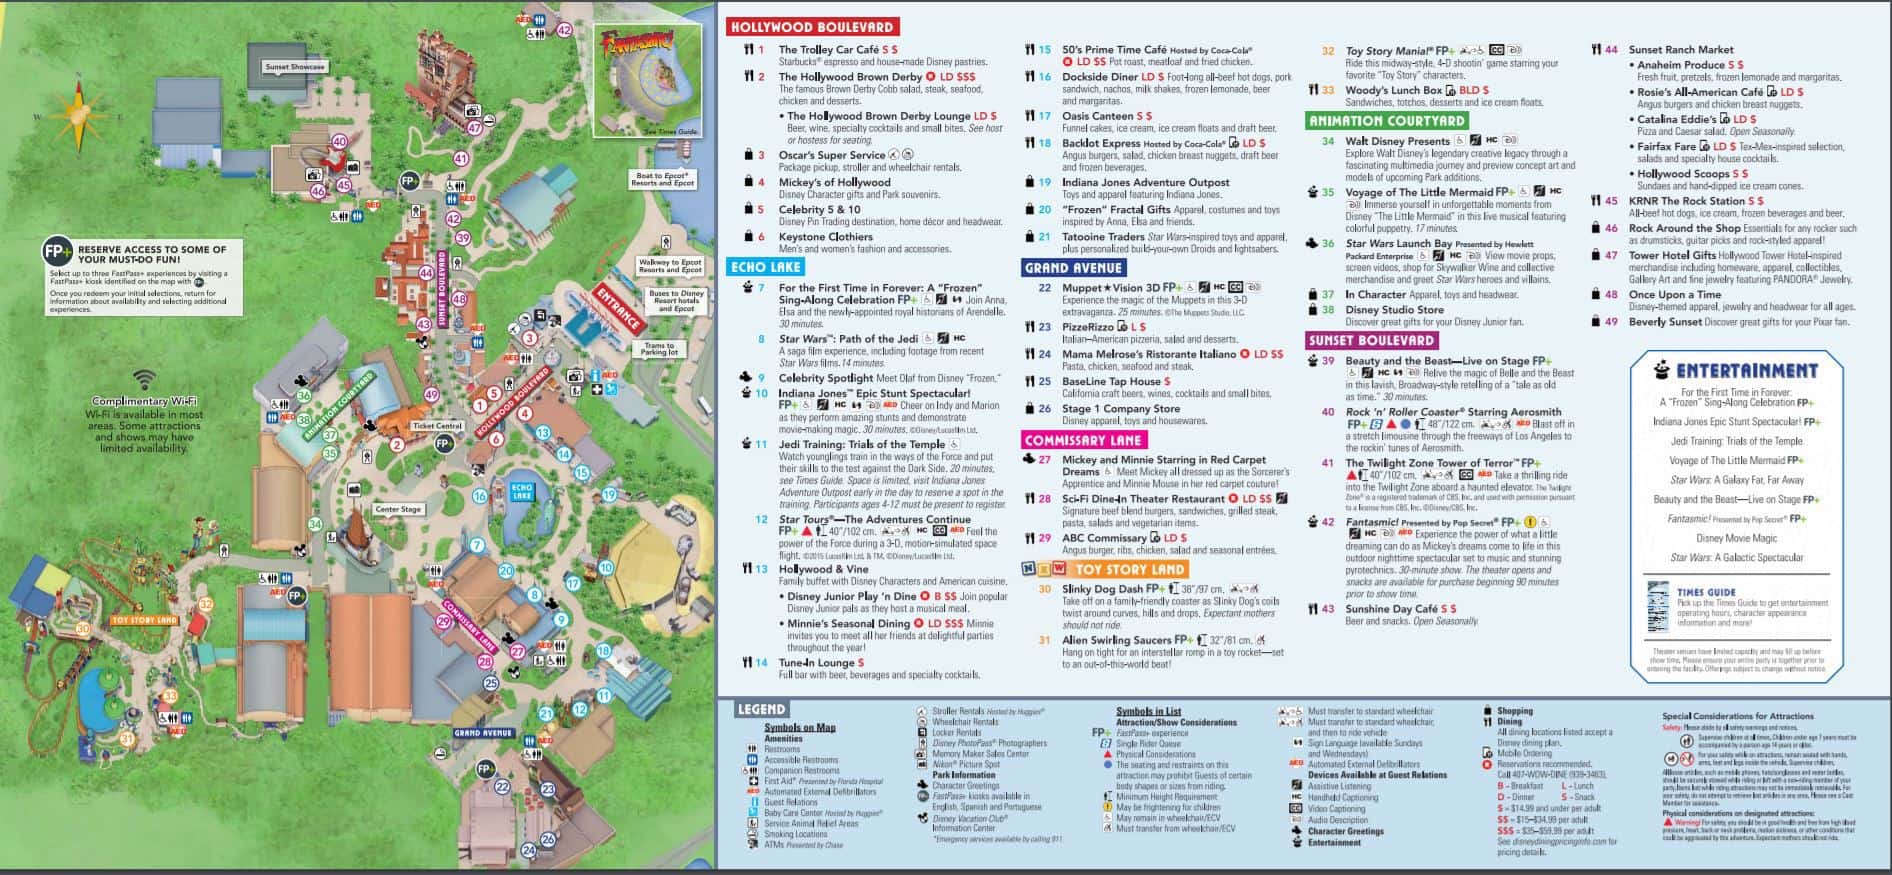 Complete guide to Disney's Hollywood Studios